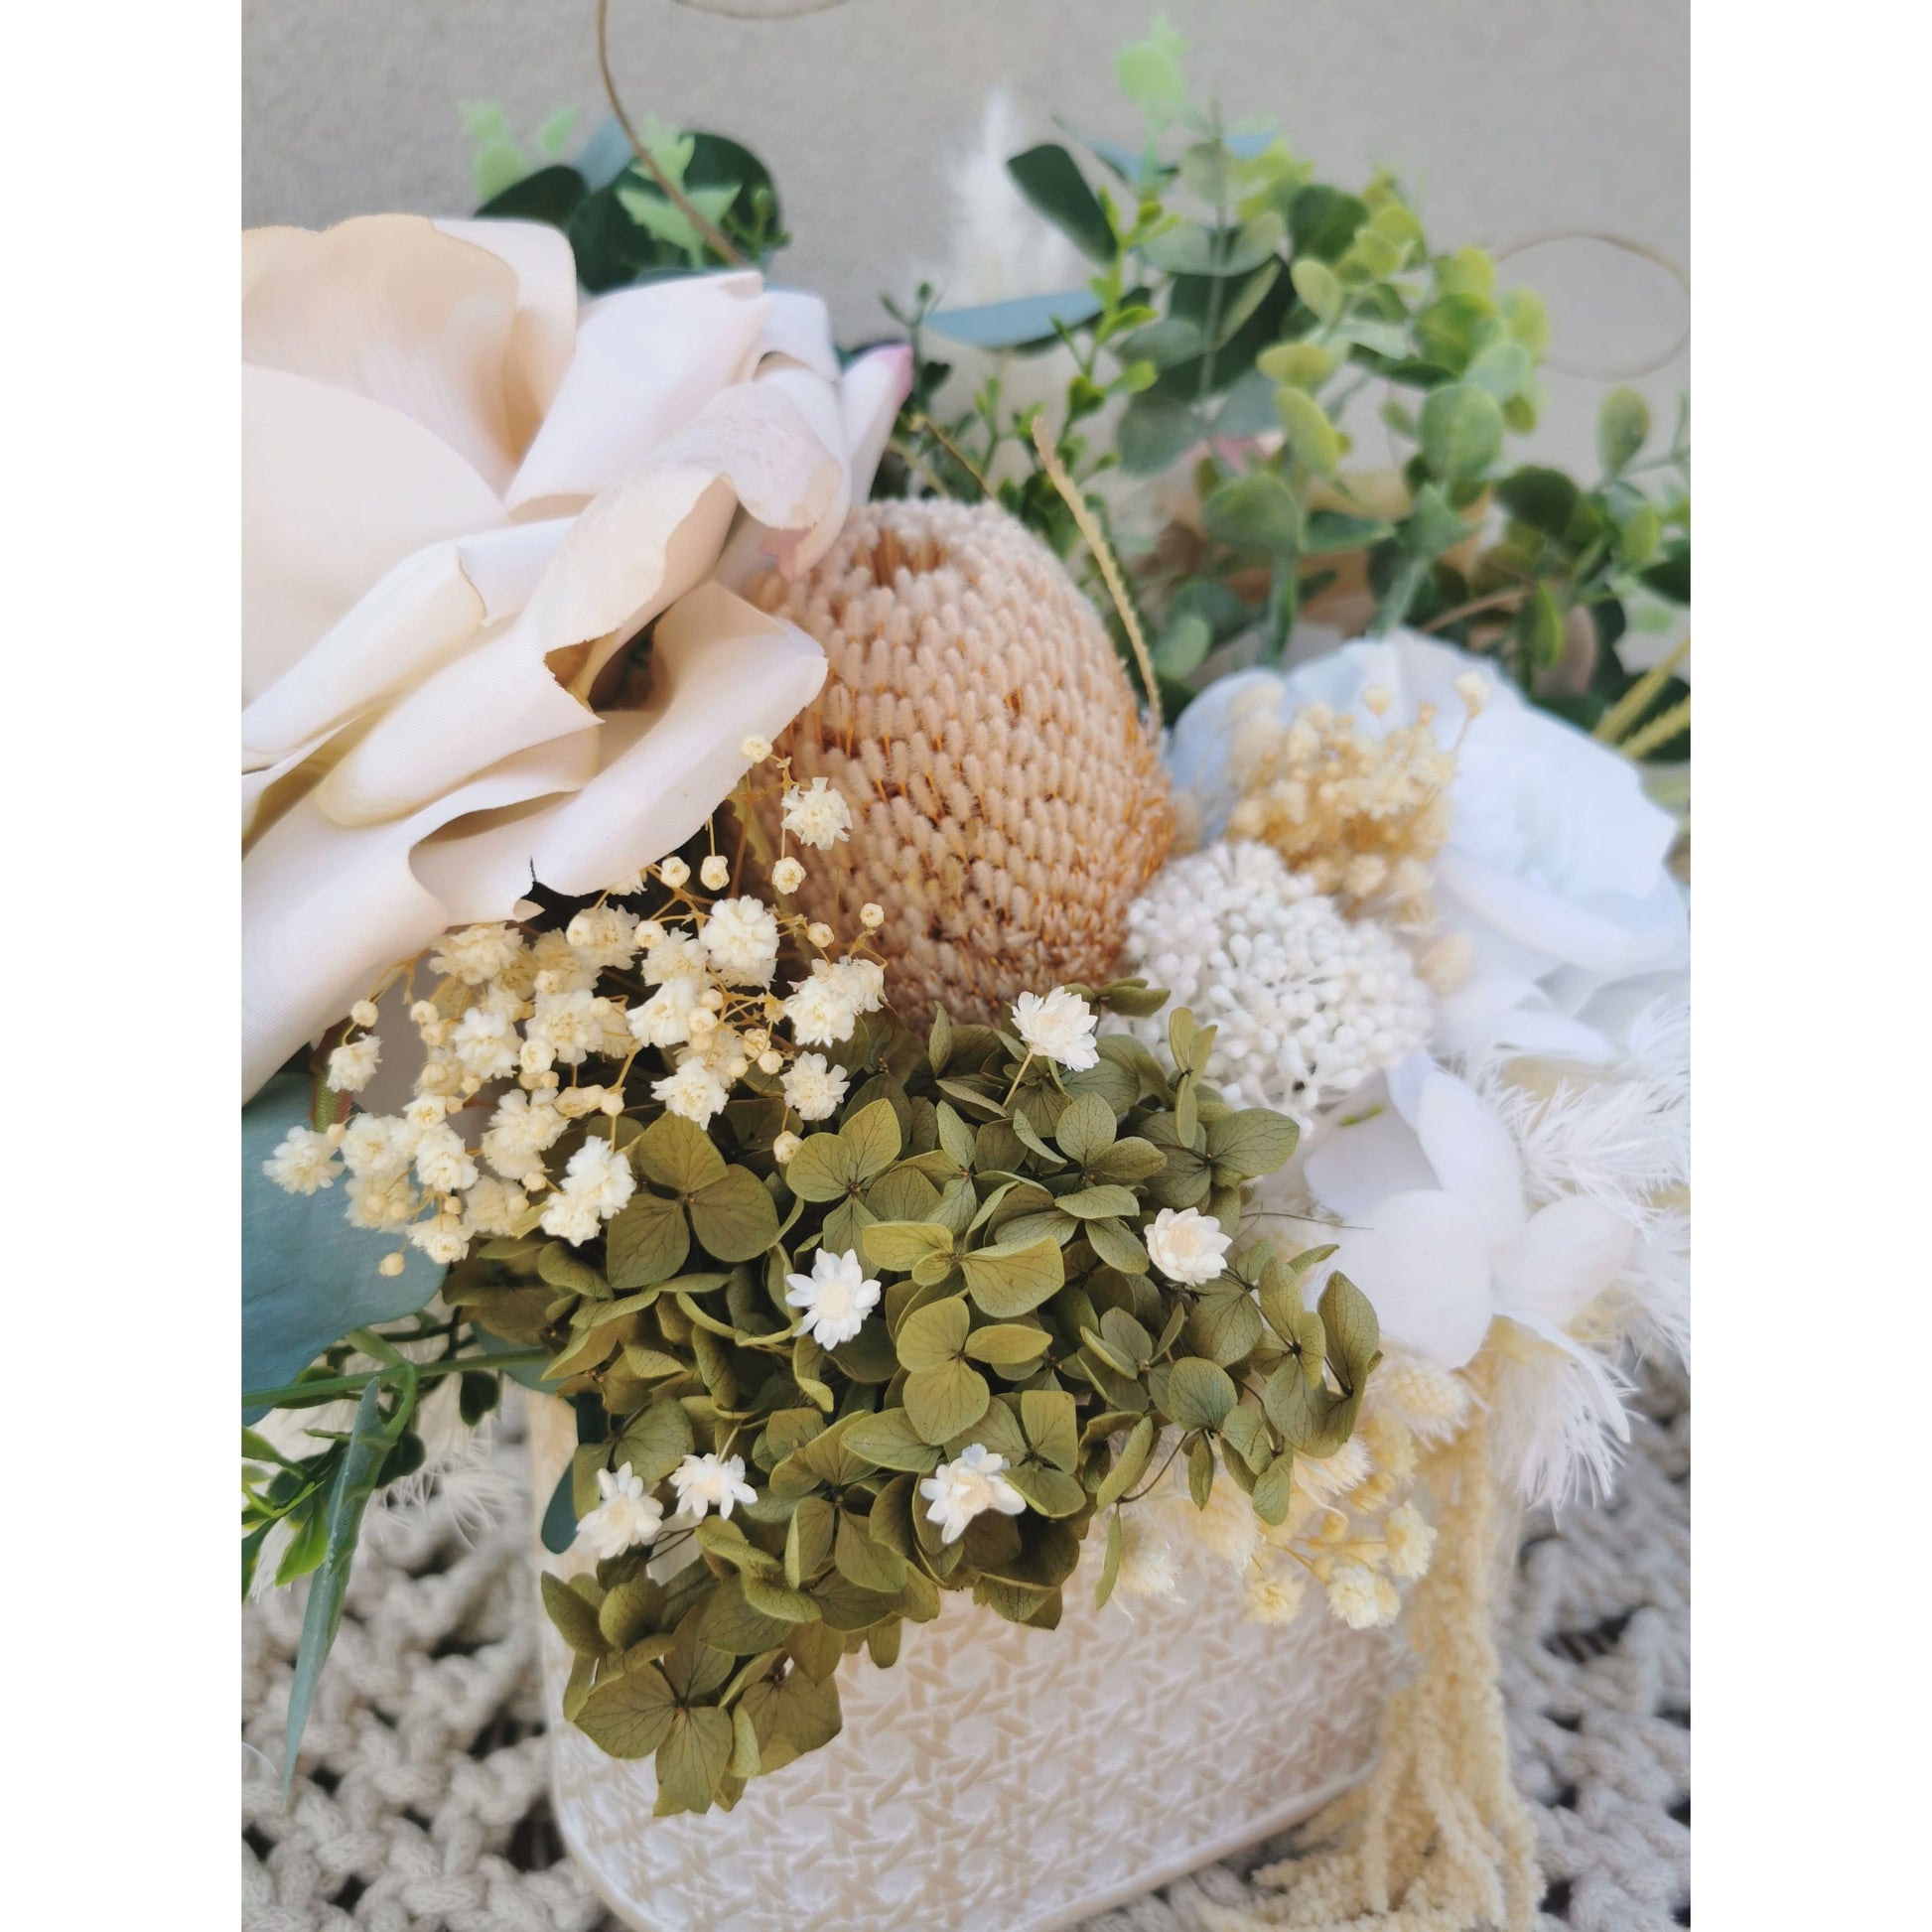 Dried, preserved and artificial flowers in colours green, white and neutral and set in to a rustic trough style pot. Picture is taken of the flower arrangement on a table against a blank wall with a close up view of the flowers